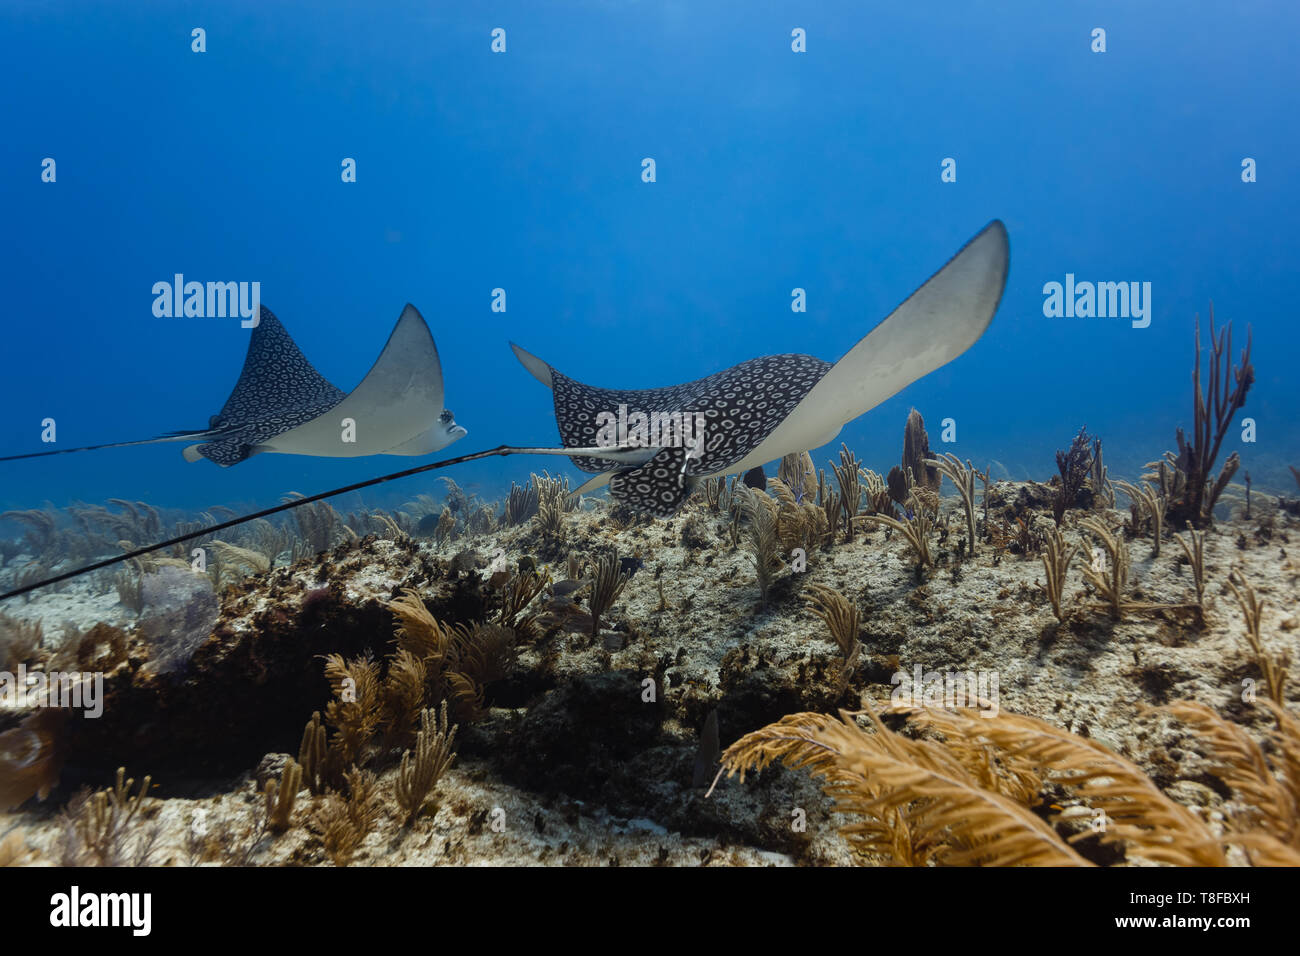 Pair of giant spotted eagle rays,  ,Aetobatus narinari, glide across sea plumes and sea fans on  coral reef Stock Photo